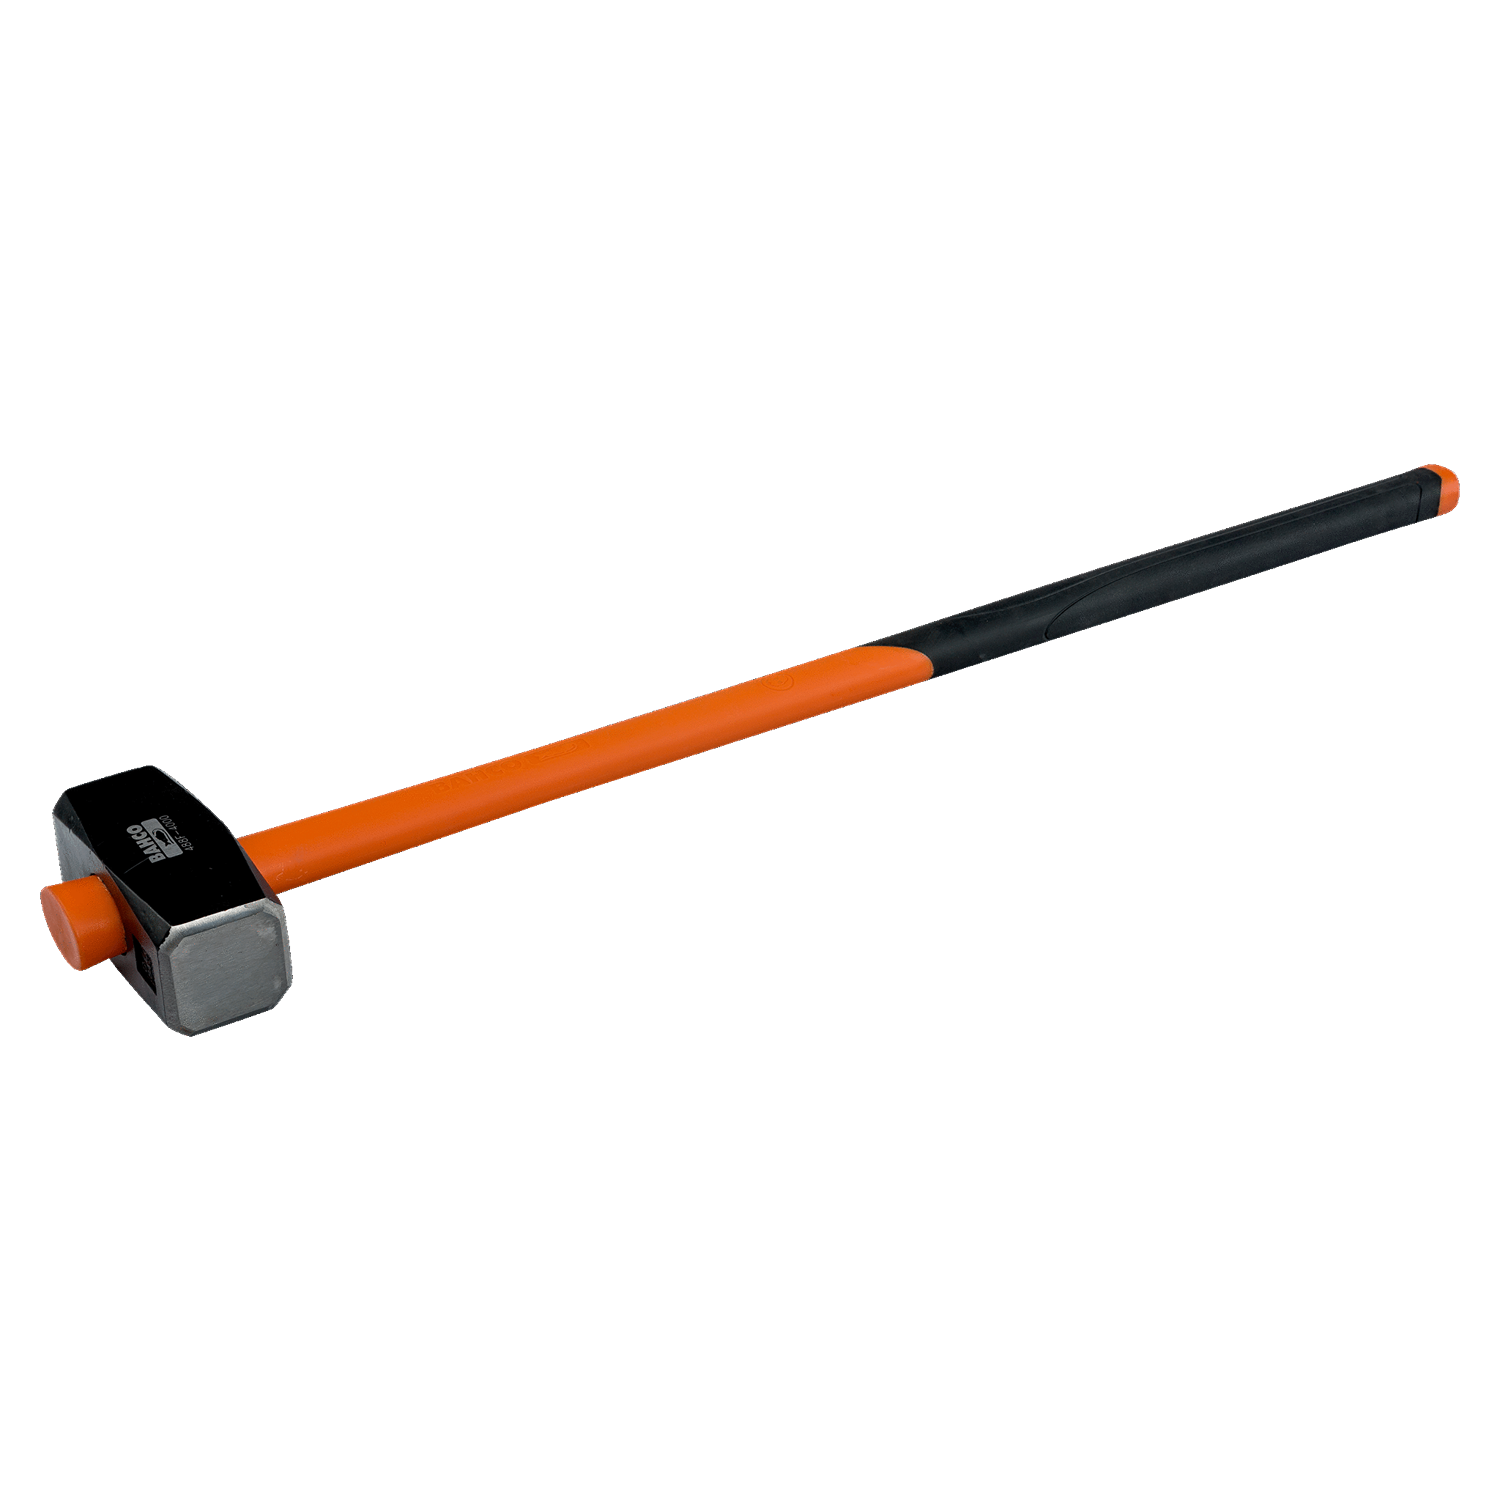 BAHCO 488F Square Head Sledge Hammer with Tri-Material Handle - Premium Sledge Hammer from BAHCO - Shop now at Yew Aik.